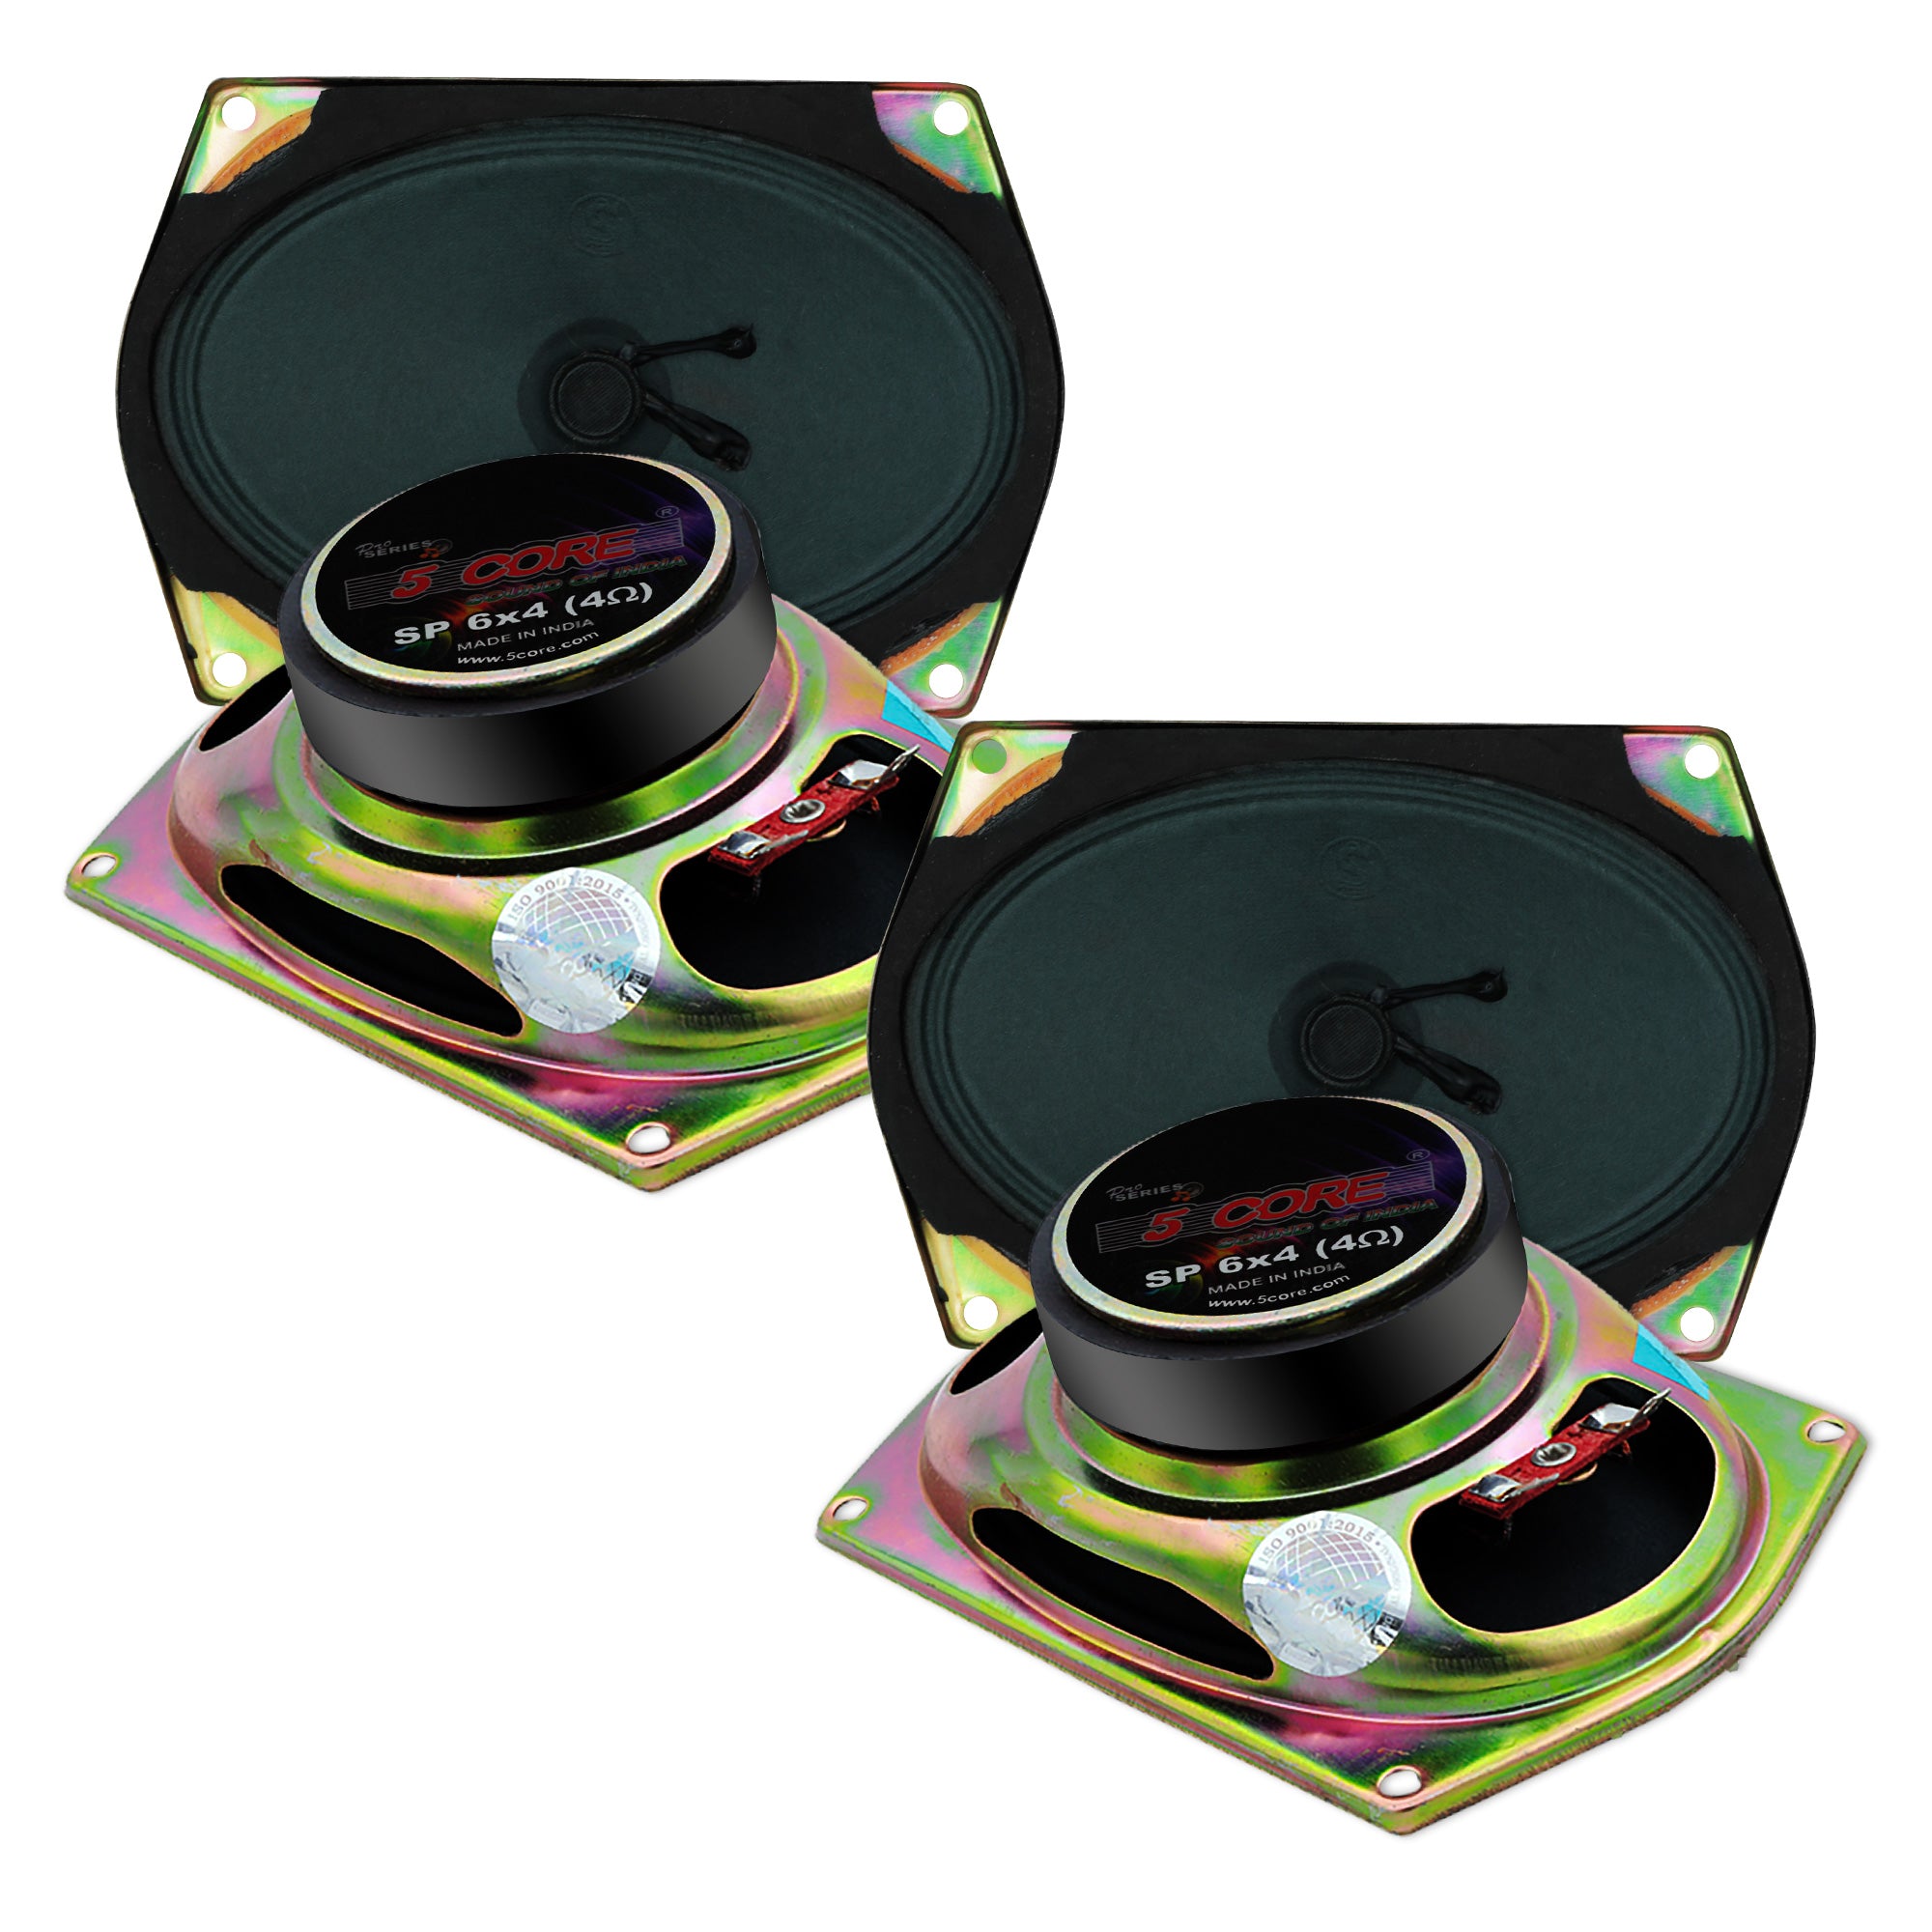 5 Core 6x4 Inch Subwoofer 2 Pack • 200W Peak 4 Ohm Replacement Car Bass Sub Woofer • 1.5" Voice Coil